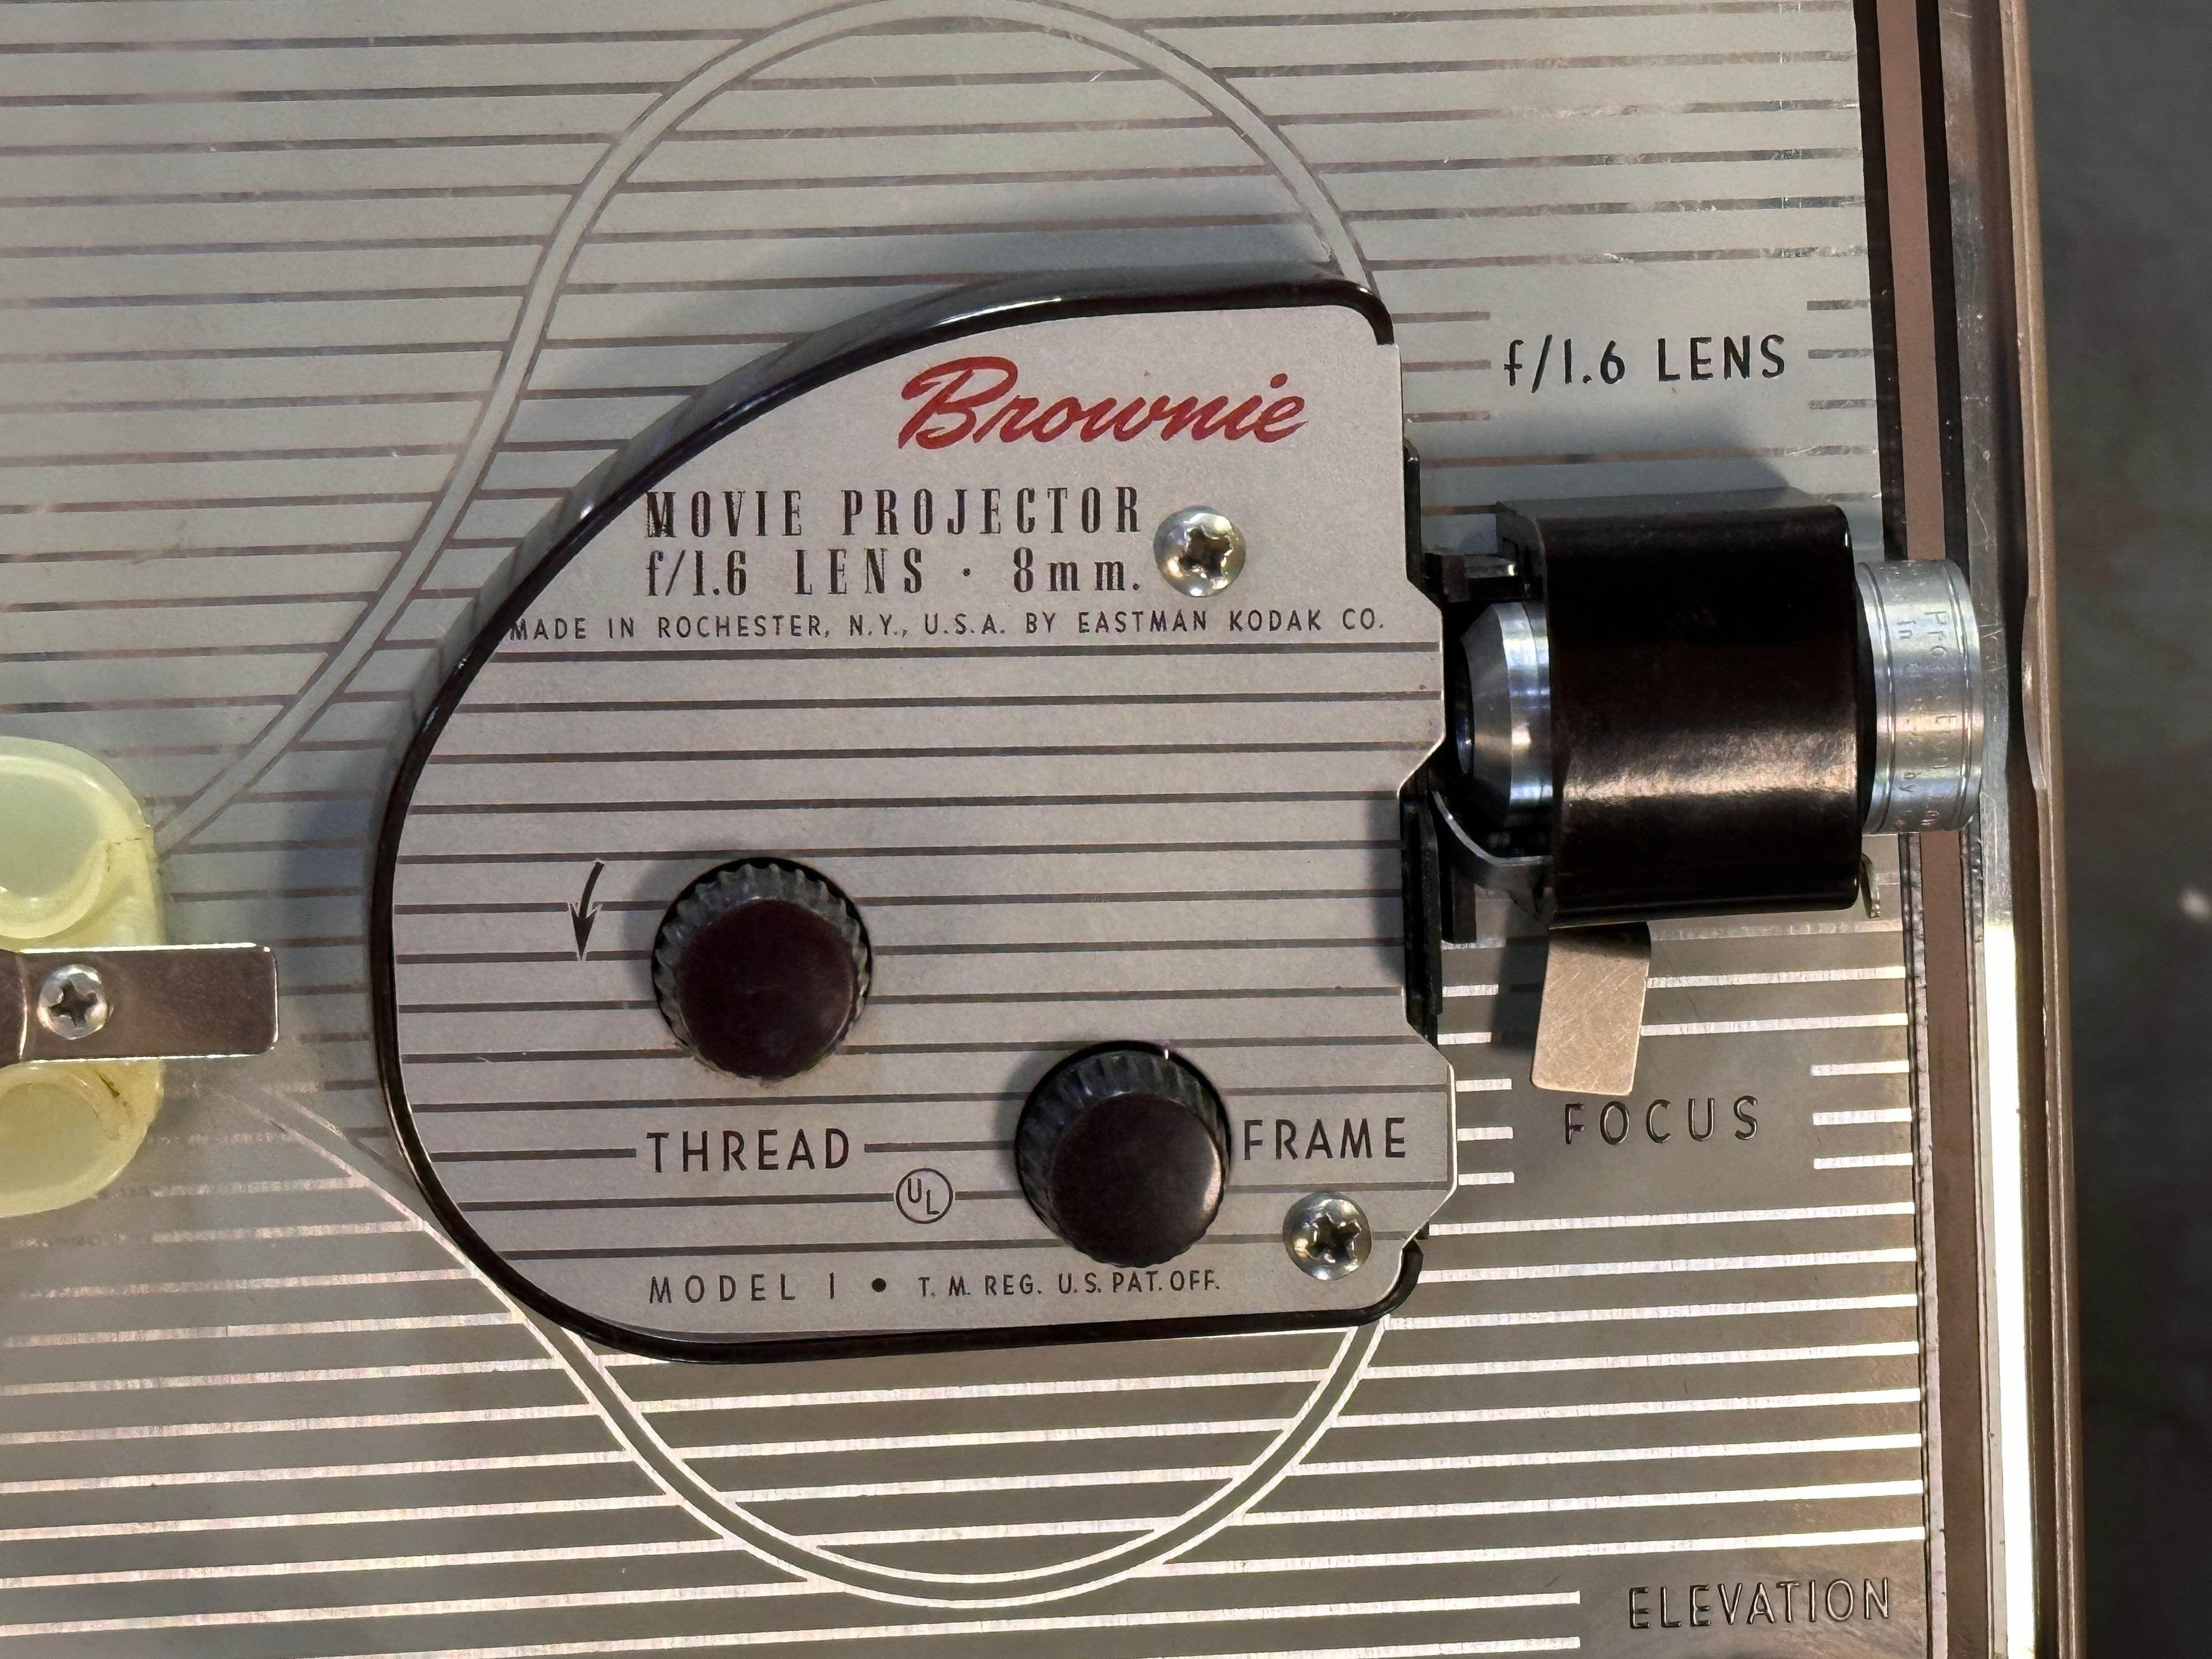 Brownie Movie Projector 8mm with f/1.6 Lumenized Lens